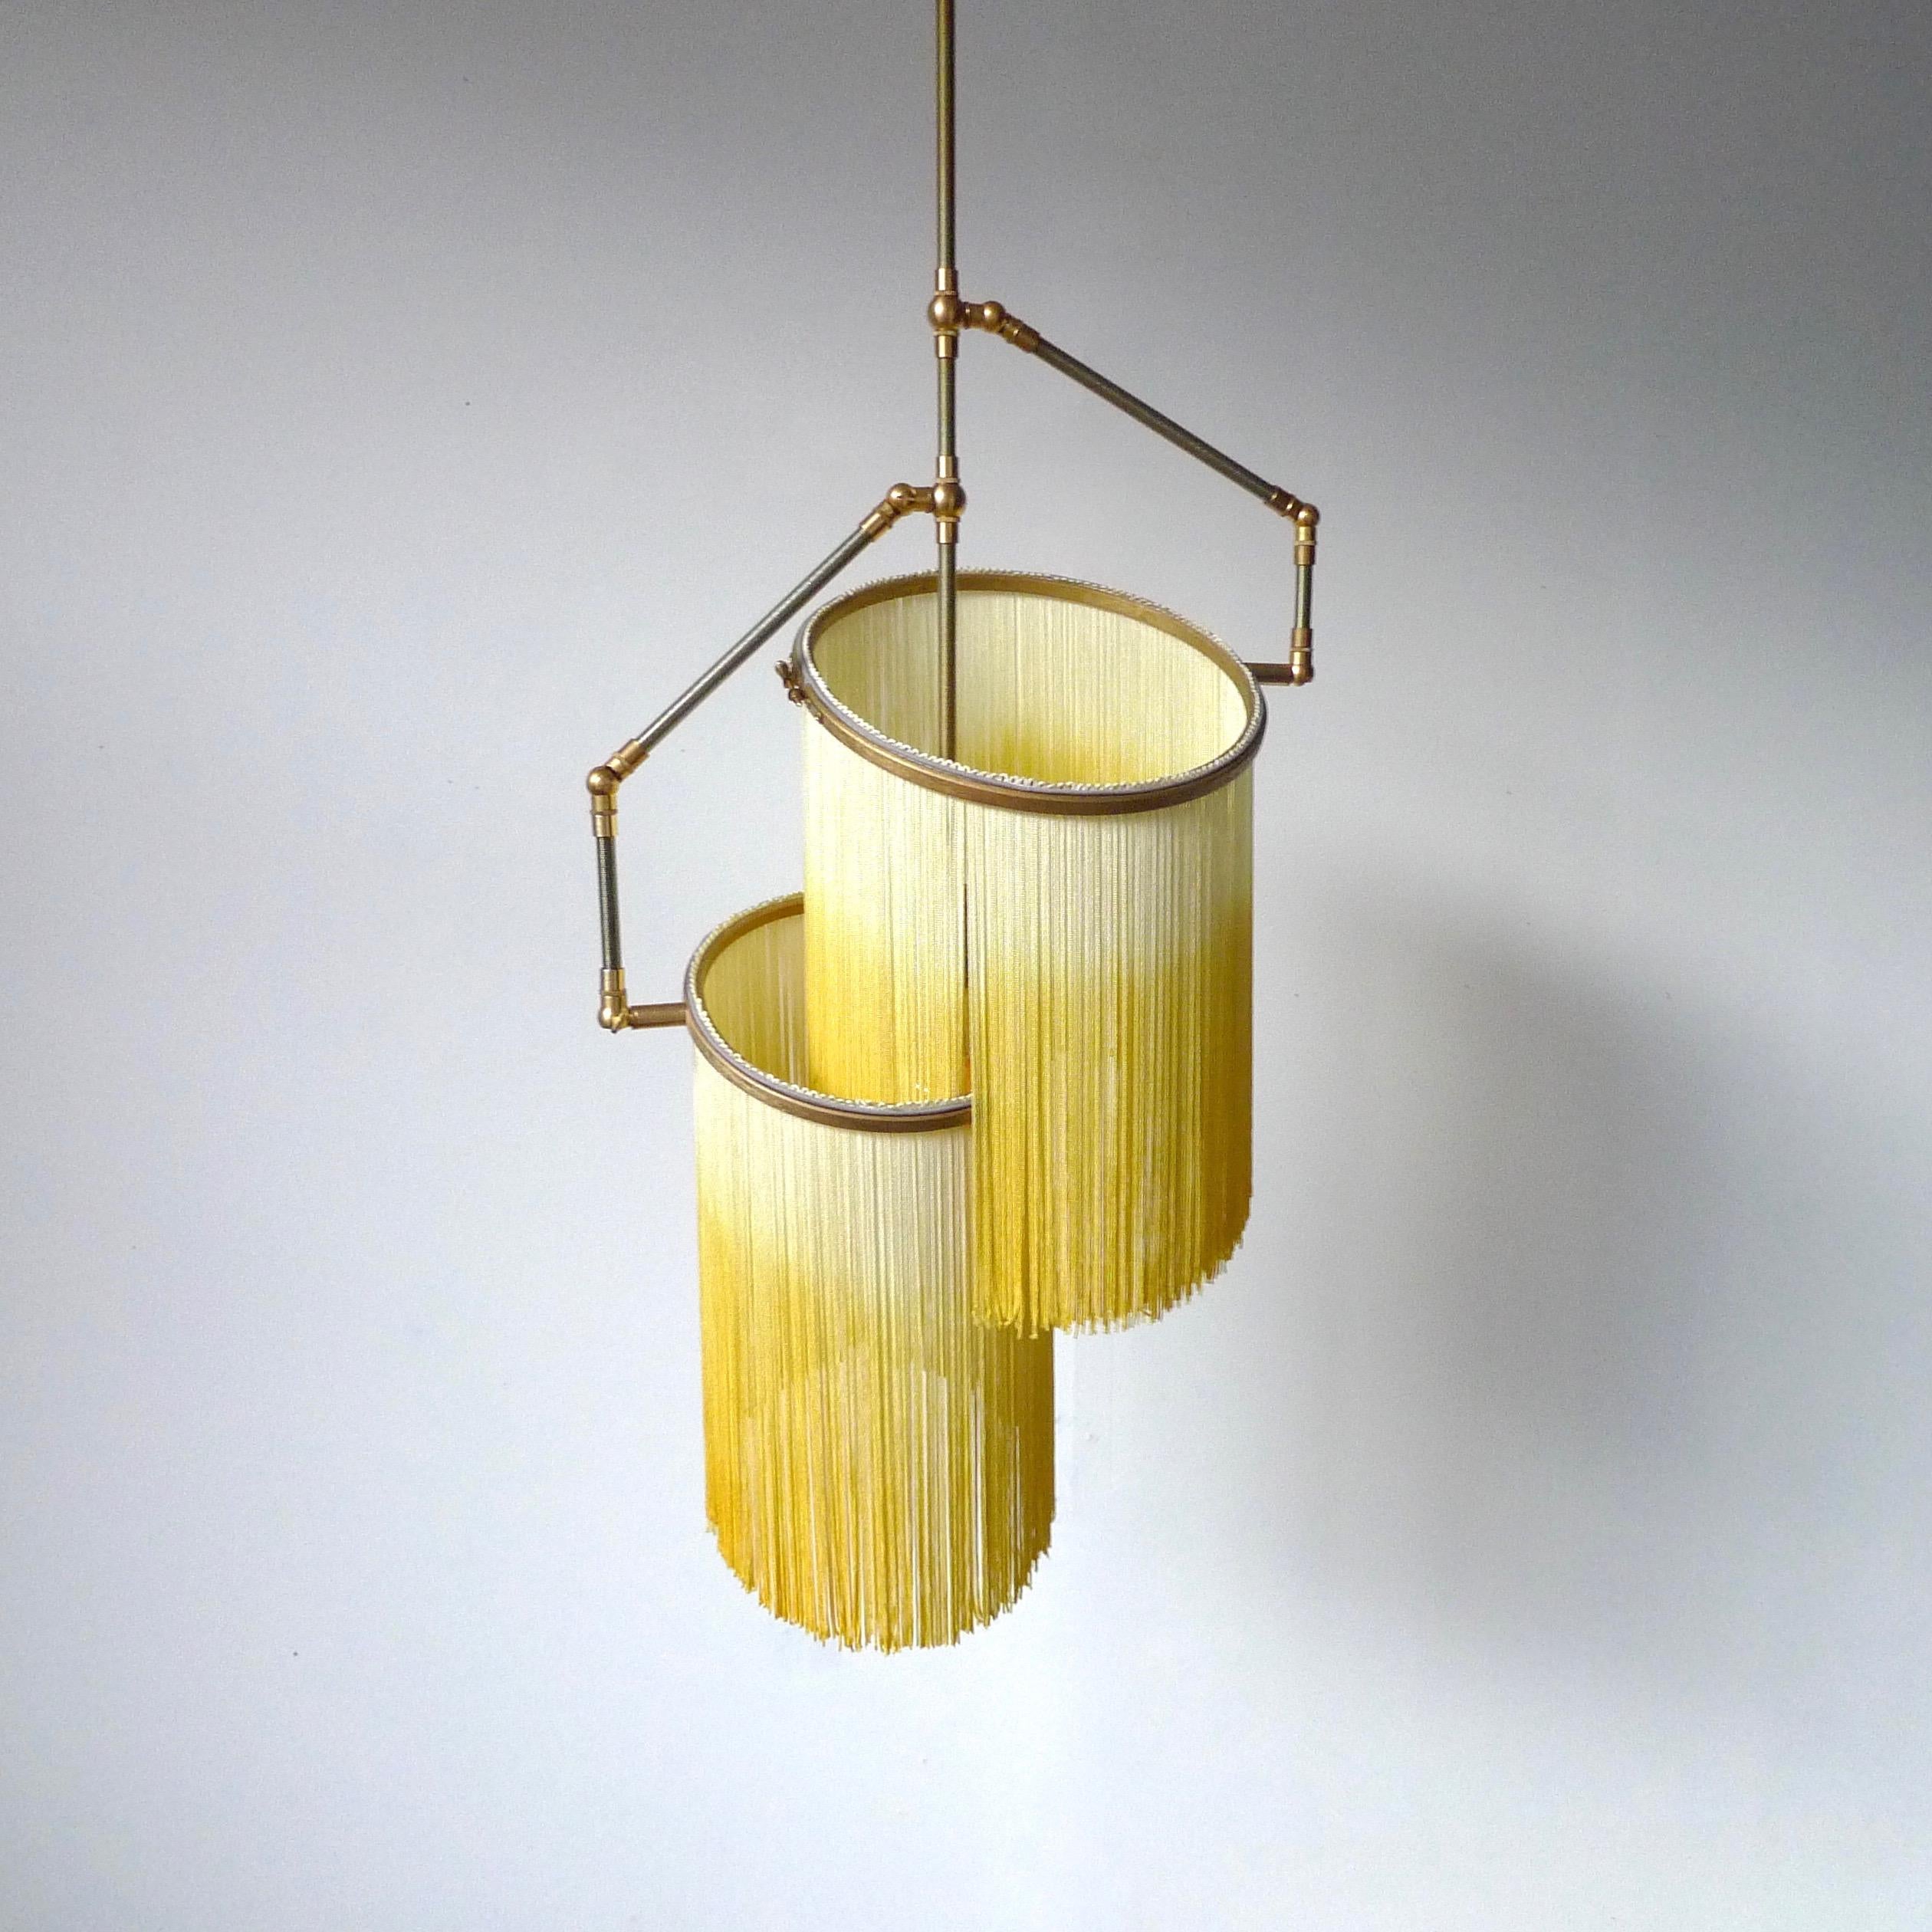 Yellow Charme pendant lamp, Sander Bottinga.

Dimensions: H 65 (can be customized) x W 38 x D 25 cm.
Hand-sculpted in brass, leather, wood and dip dyed colored Fringes in viscose.
The movable arms makes it possible to move the circles with